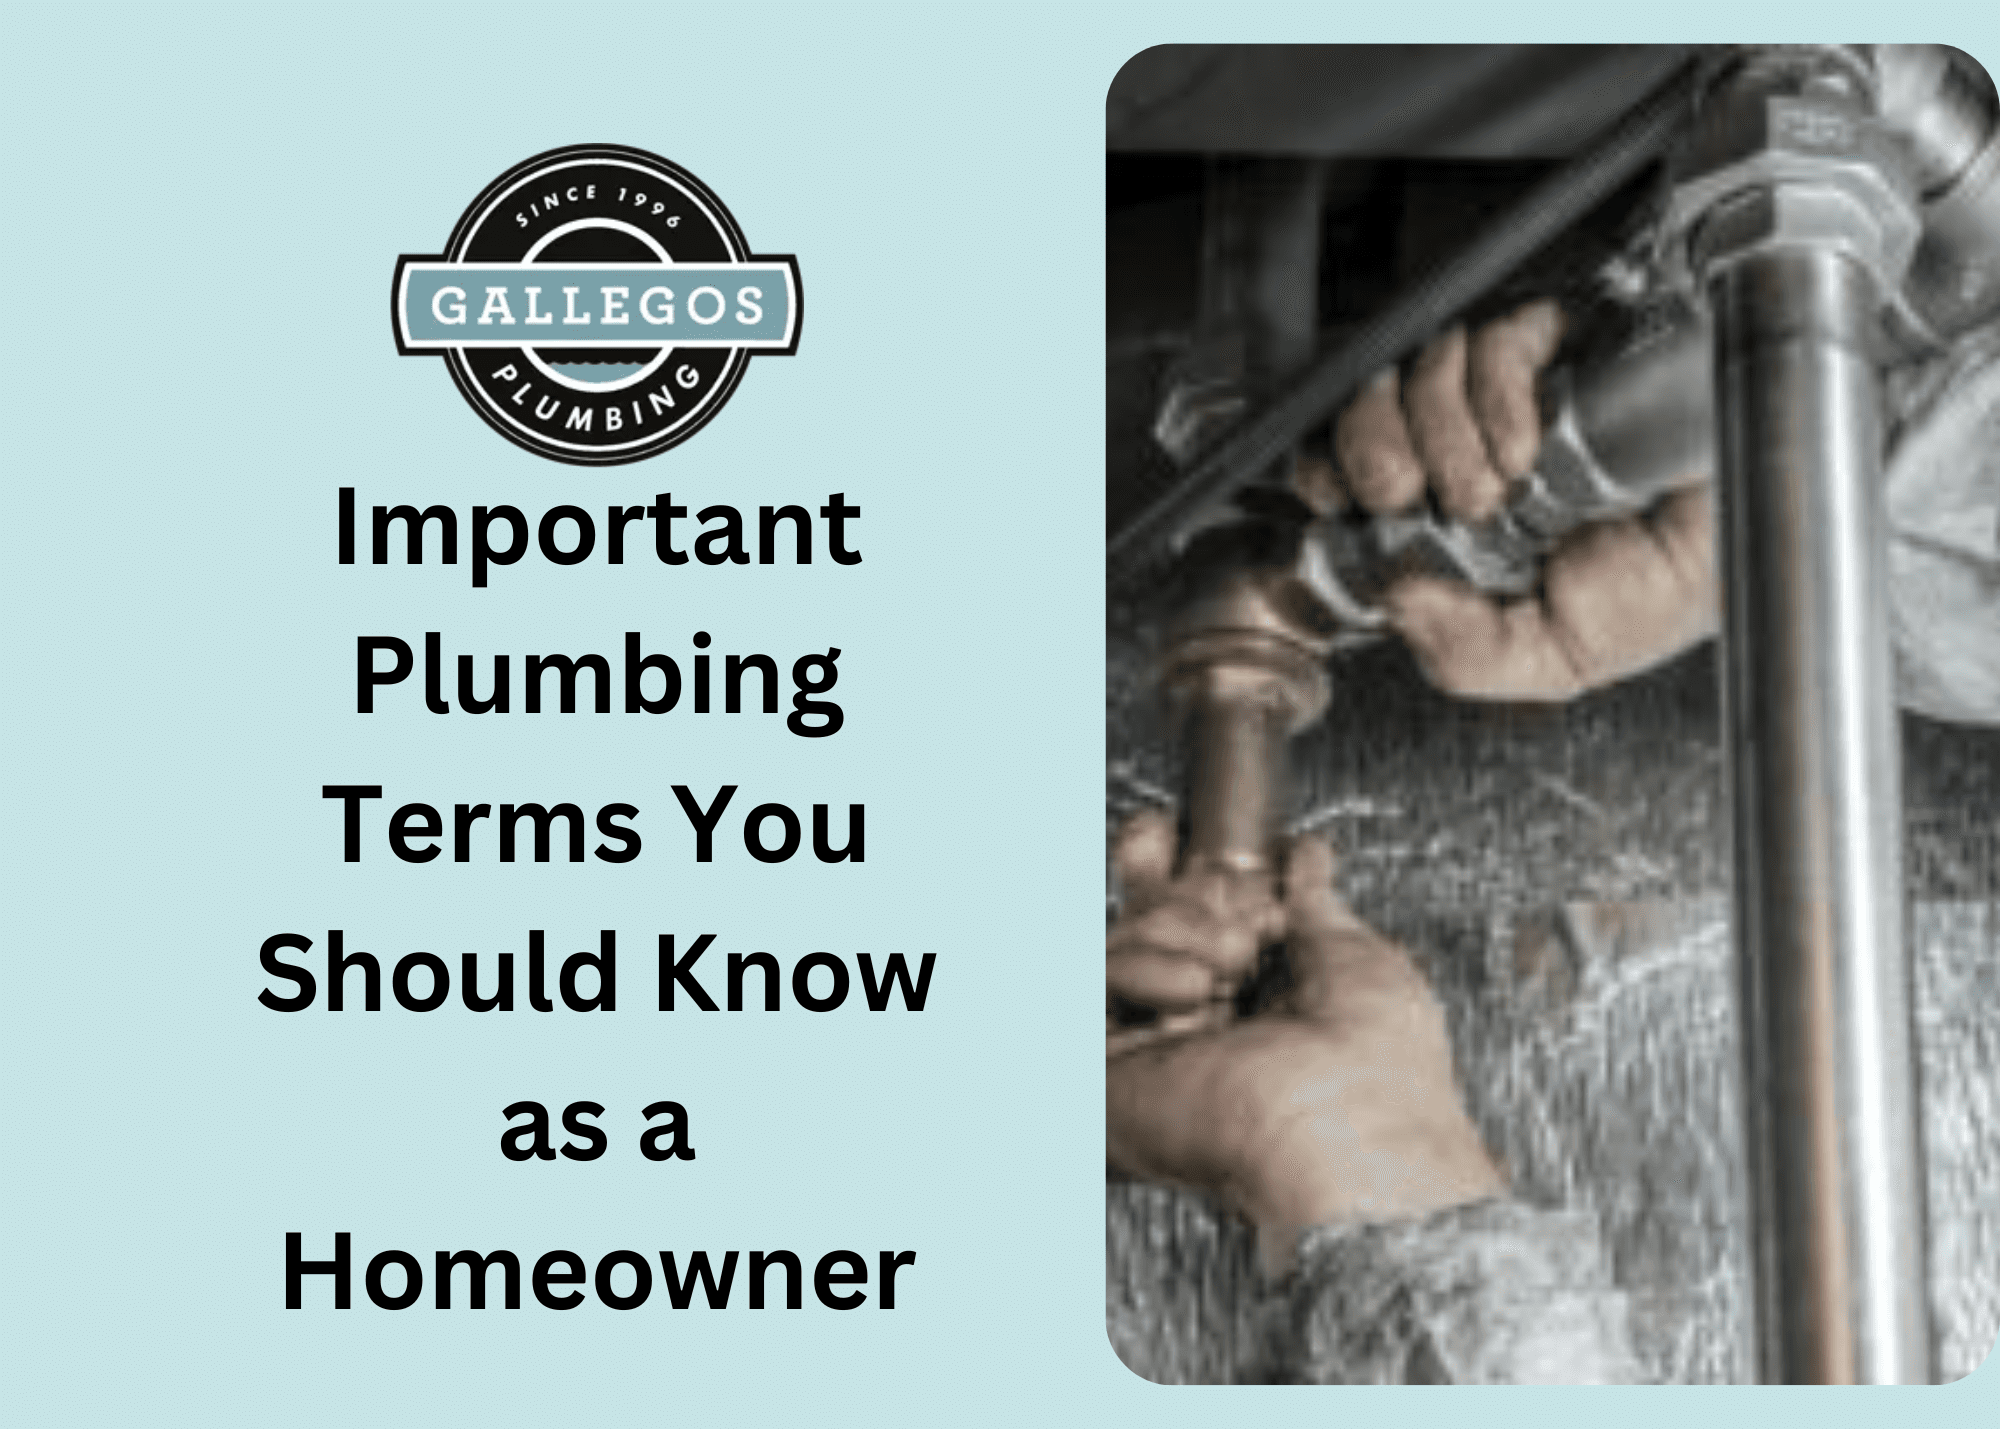 "Important Plumbing Terms You Should Know as a Homeowner" Text on Image of Plumber Performing Repairs